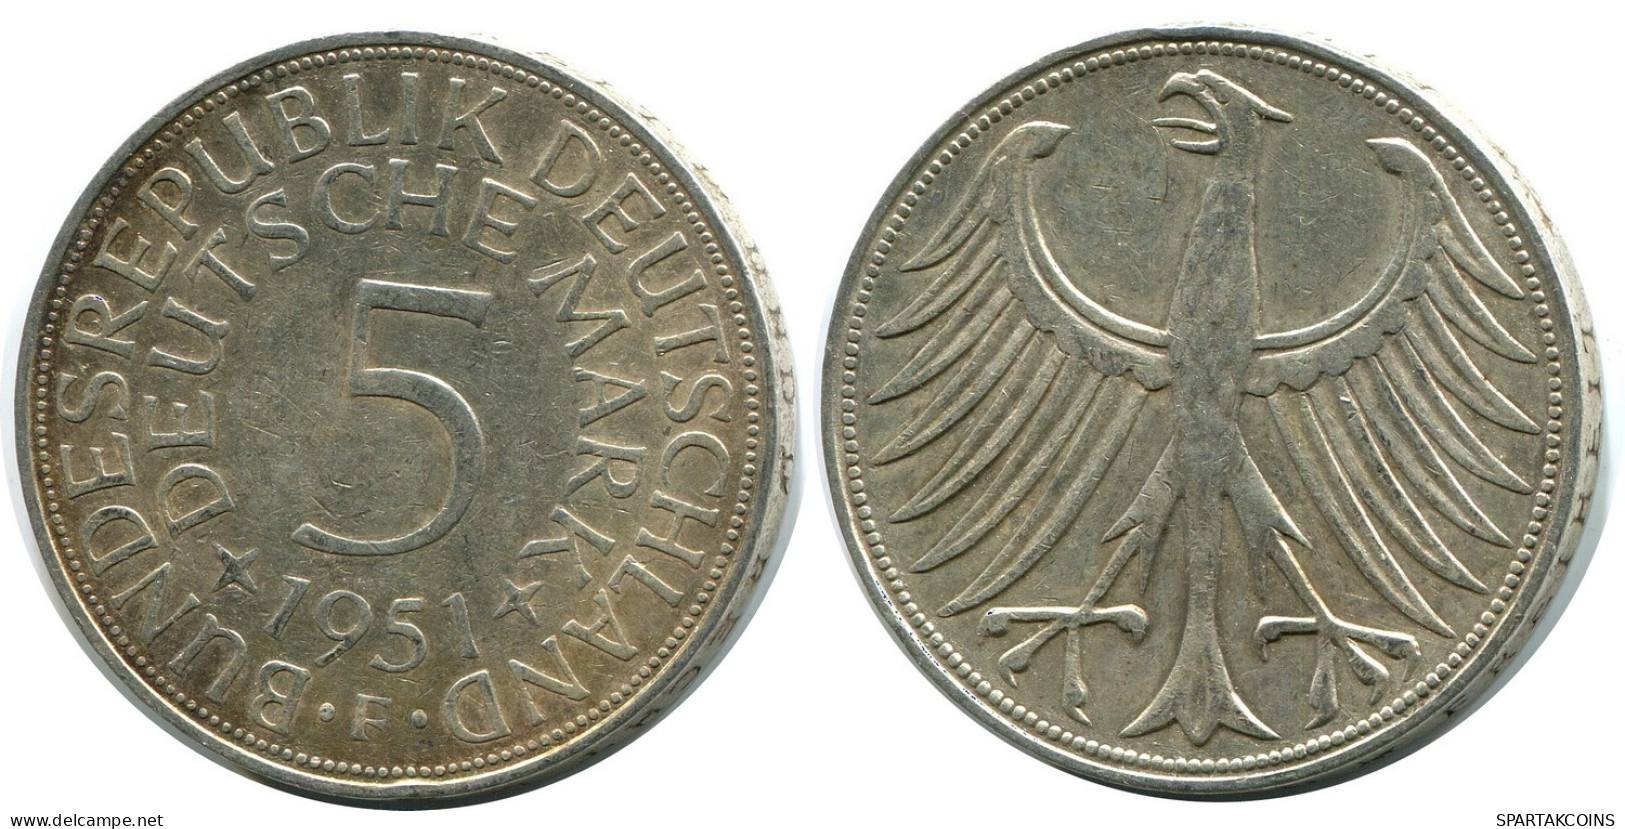 5 DM 1951 F WEST & UNIFIED GERMANY Coin #DB336.U.A - 5 Marchi